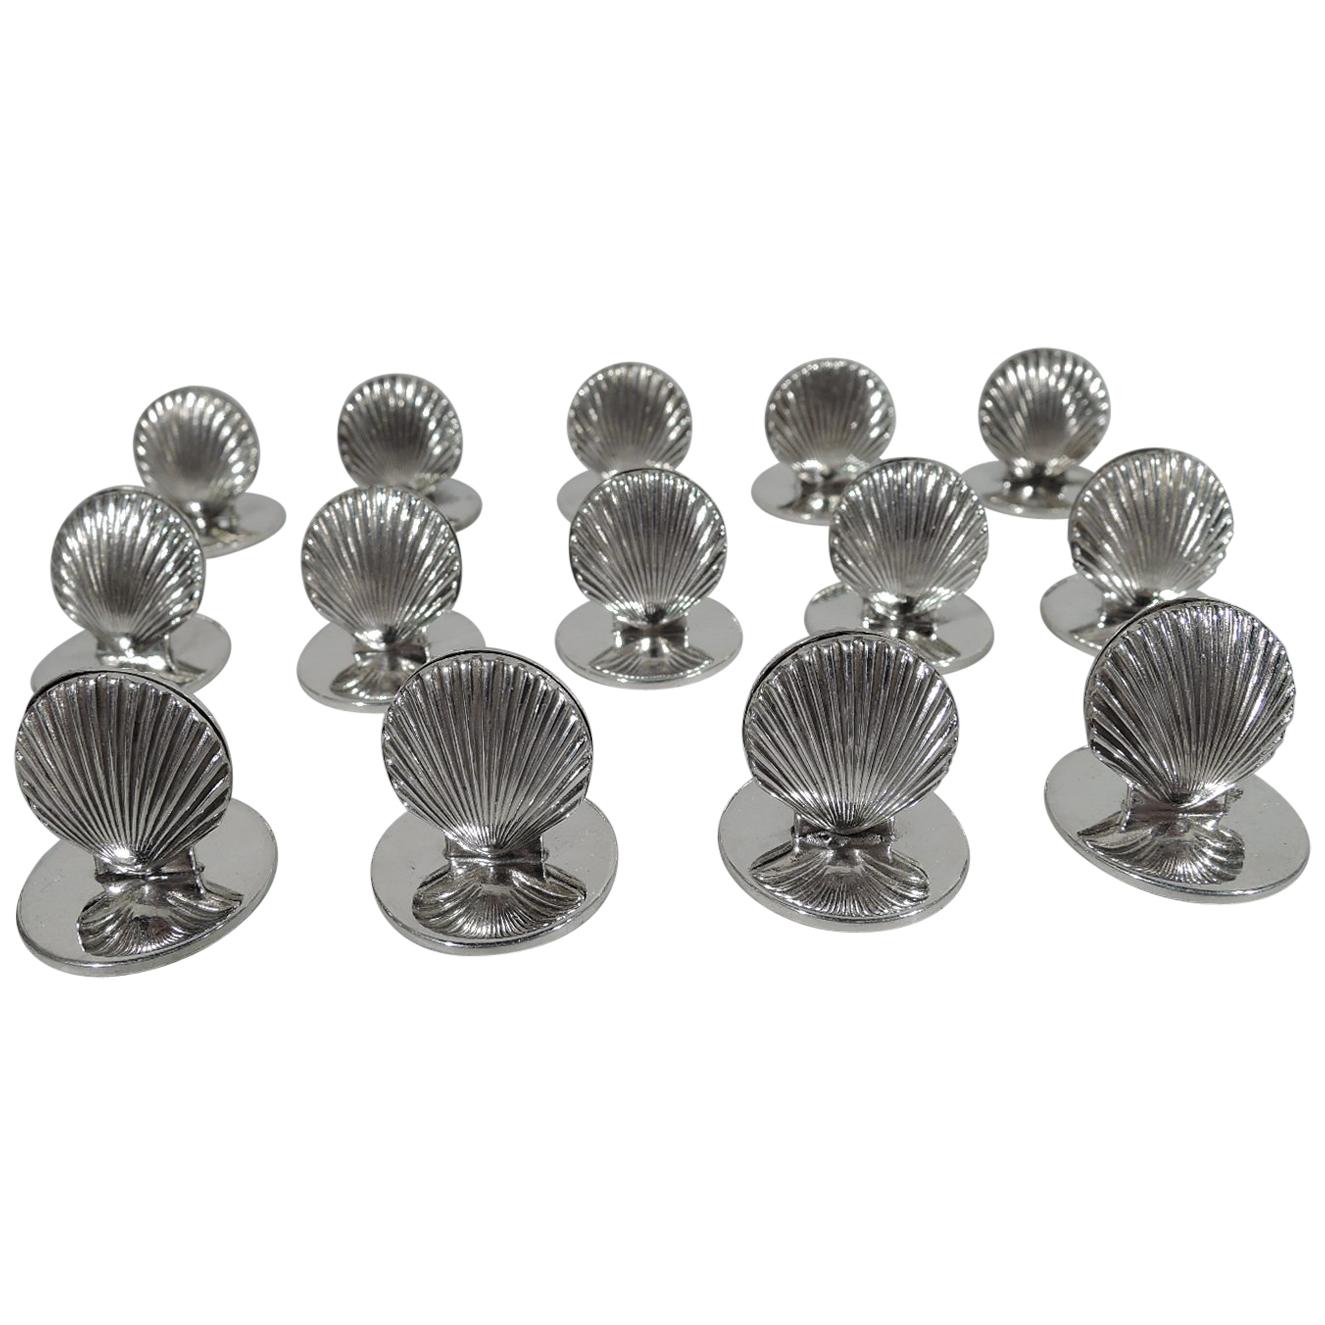 Set of 14 Tiffany Sterling Silver Scallop Shell Place Card Holders